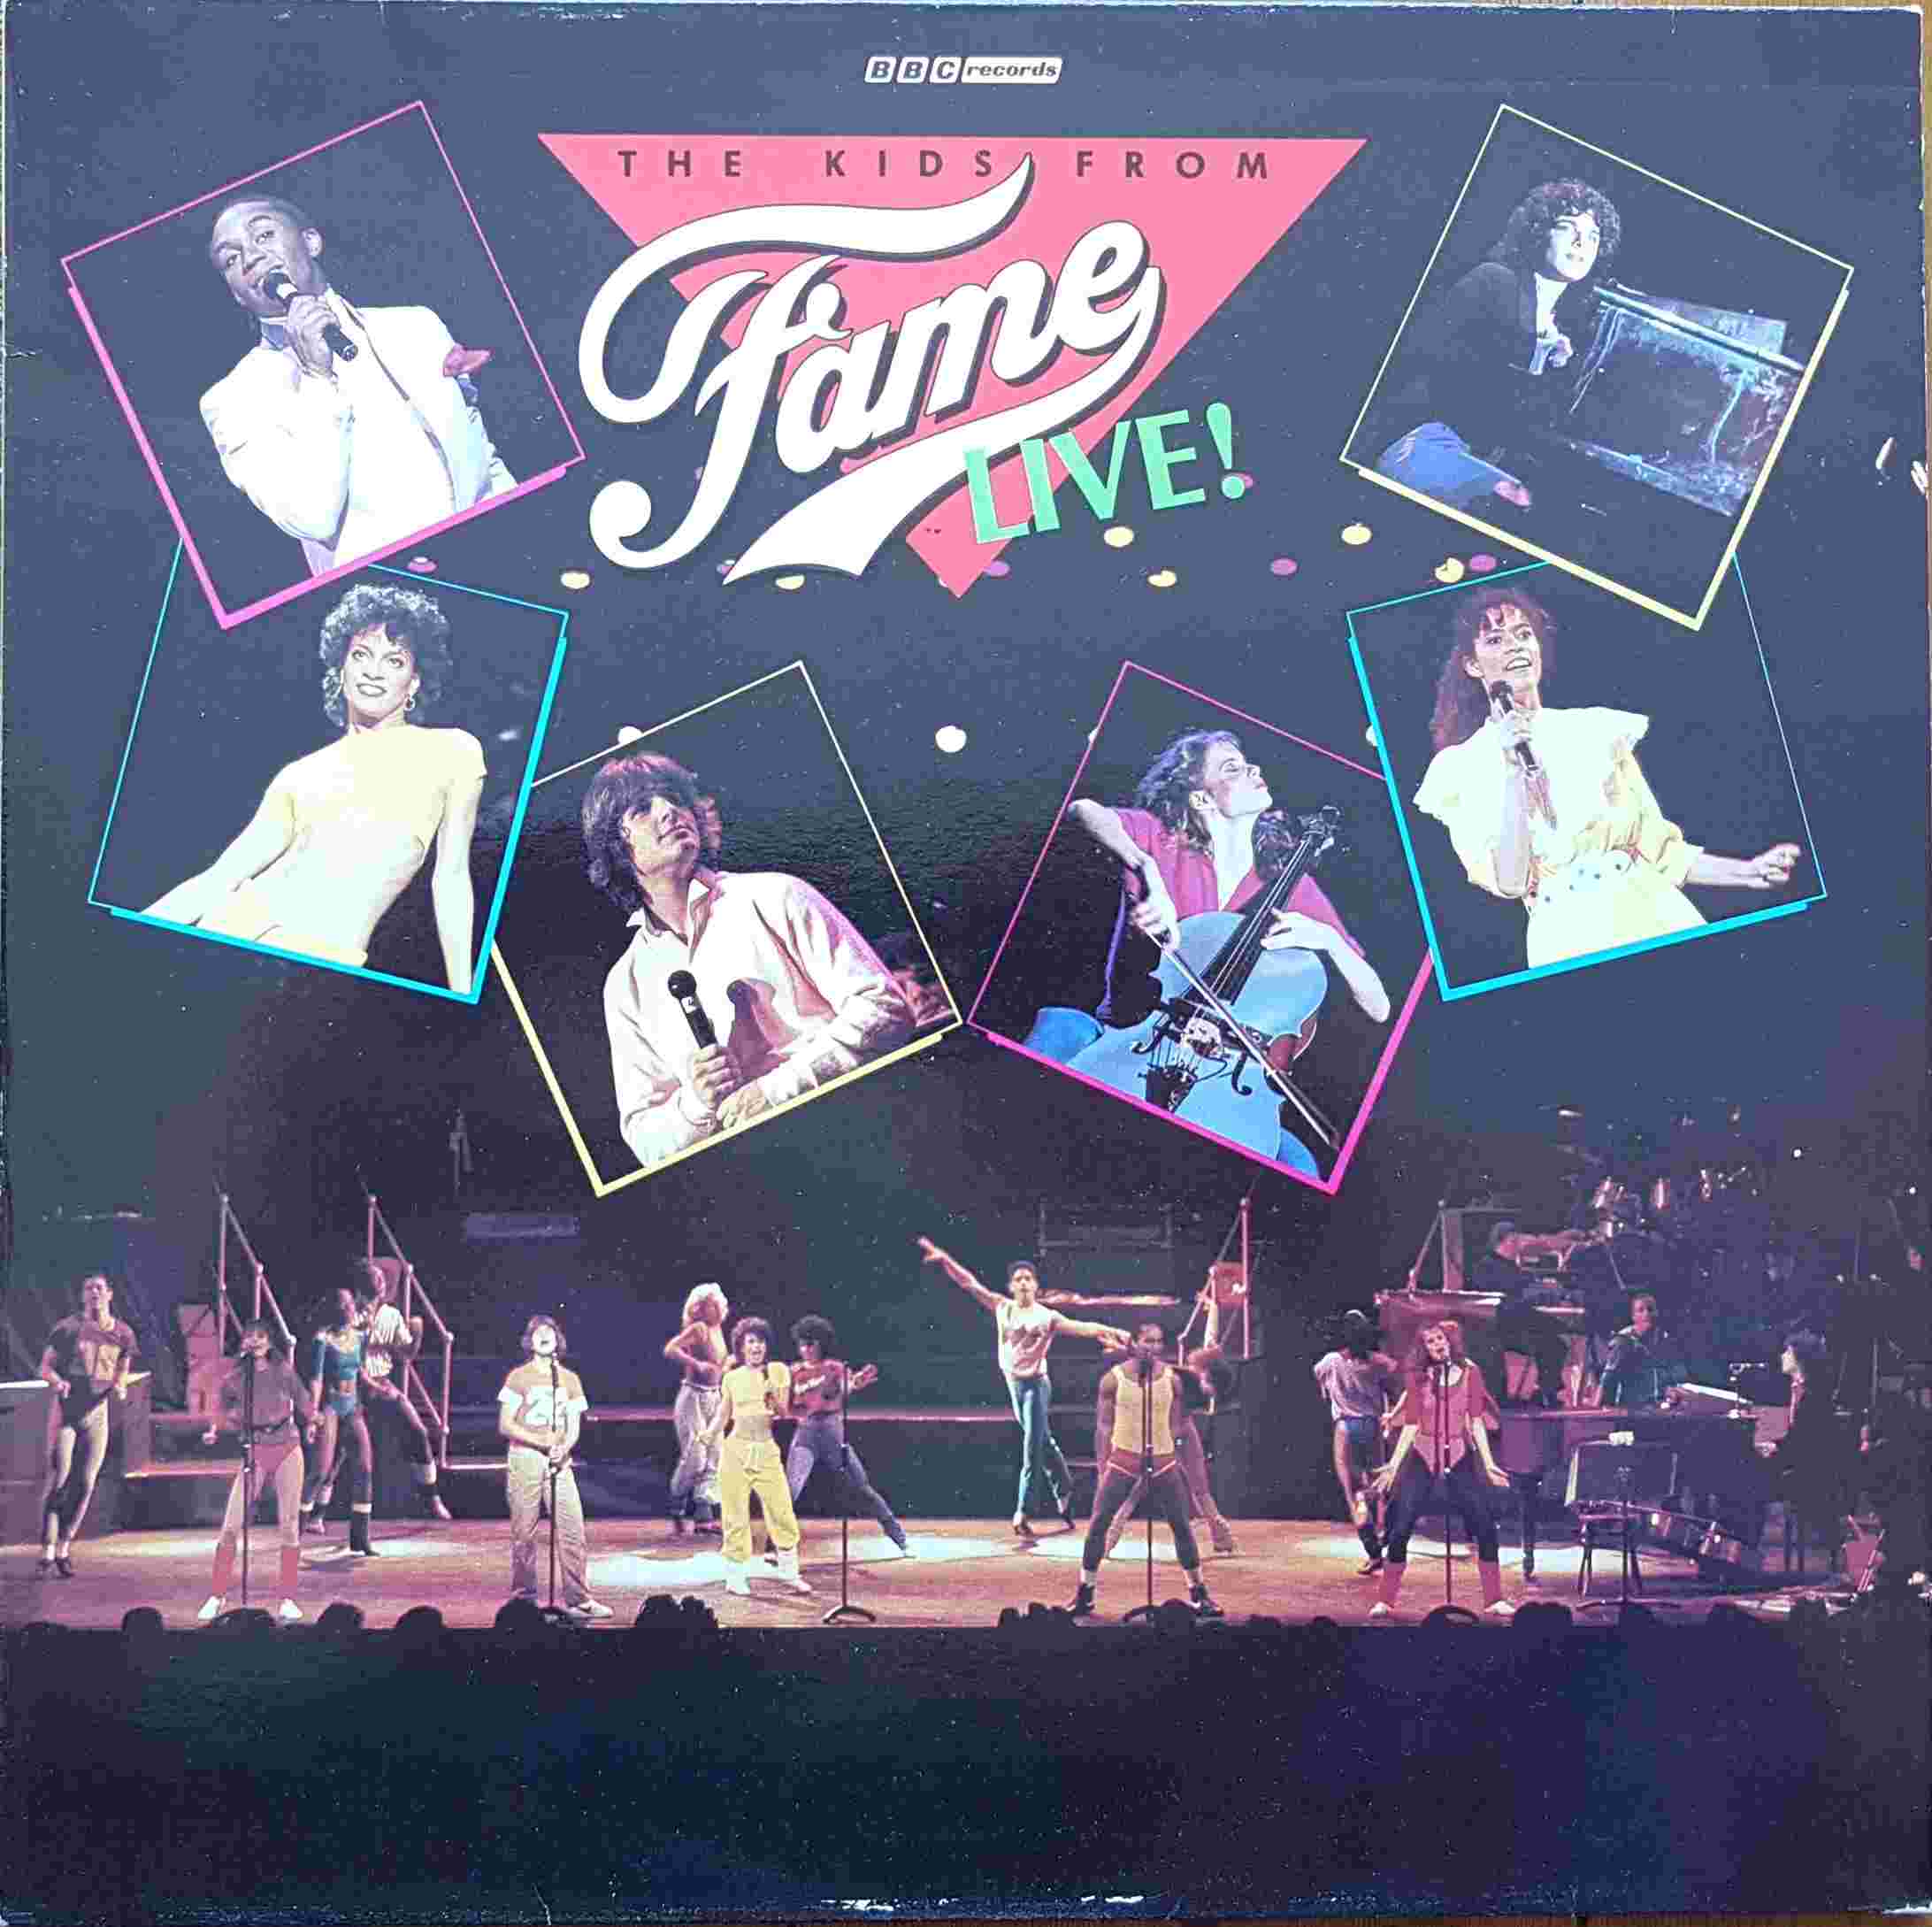 Picture of KIDLP 003 The kids from fame - Live by artist Various from the BBC albums - Records and Tapes library